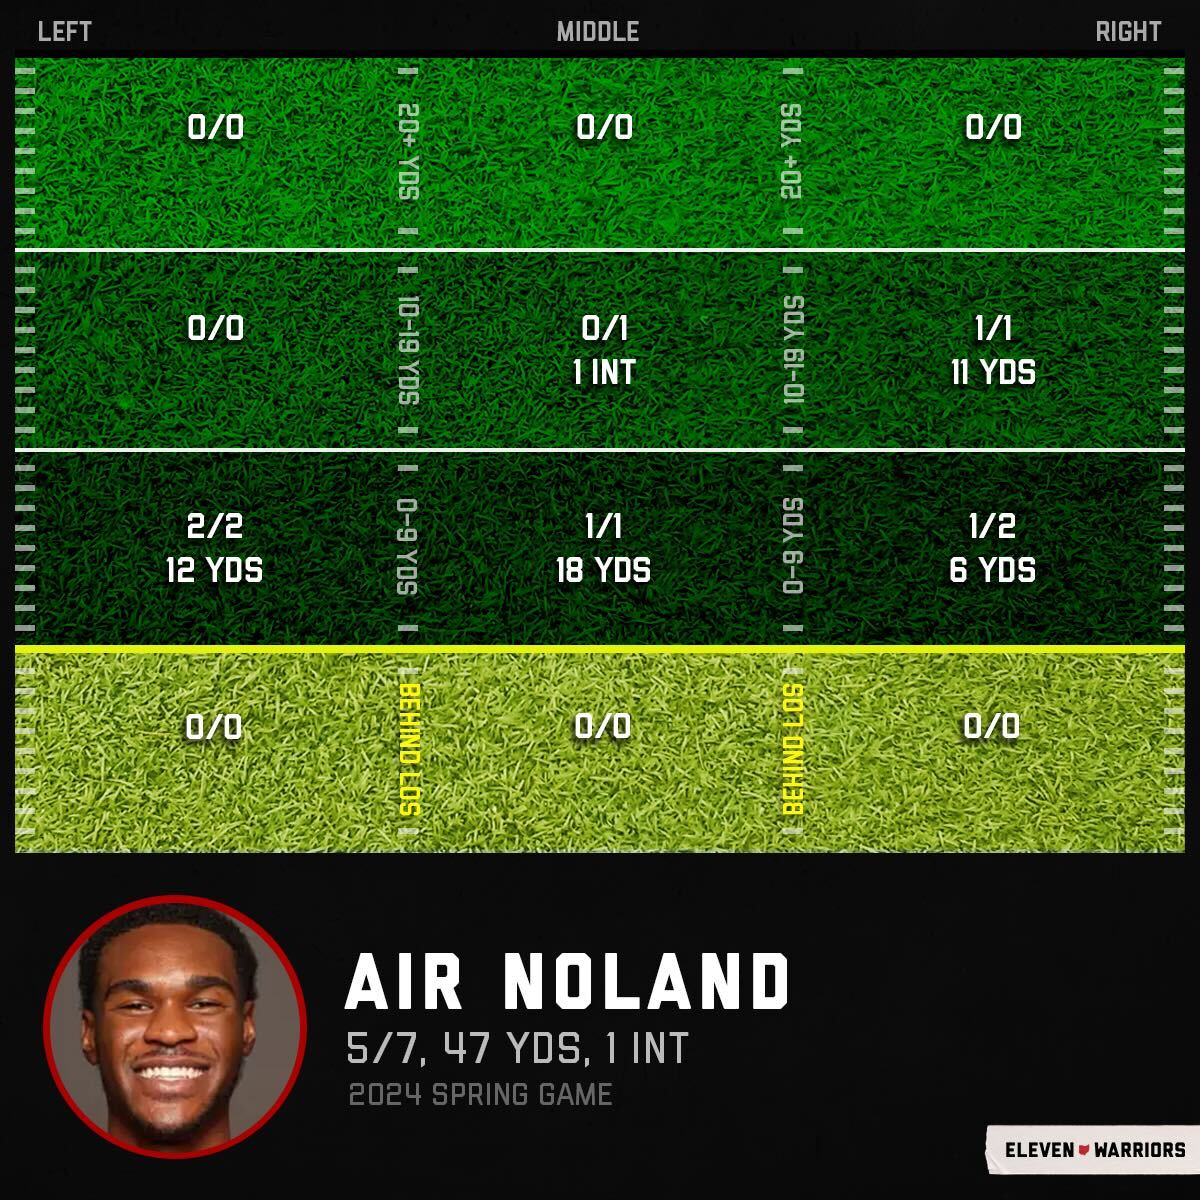 Air Noland's passing chart in the 2024 spring game